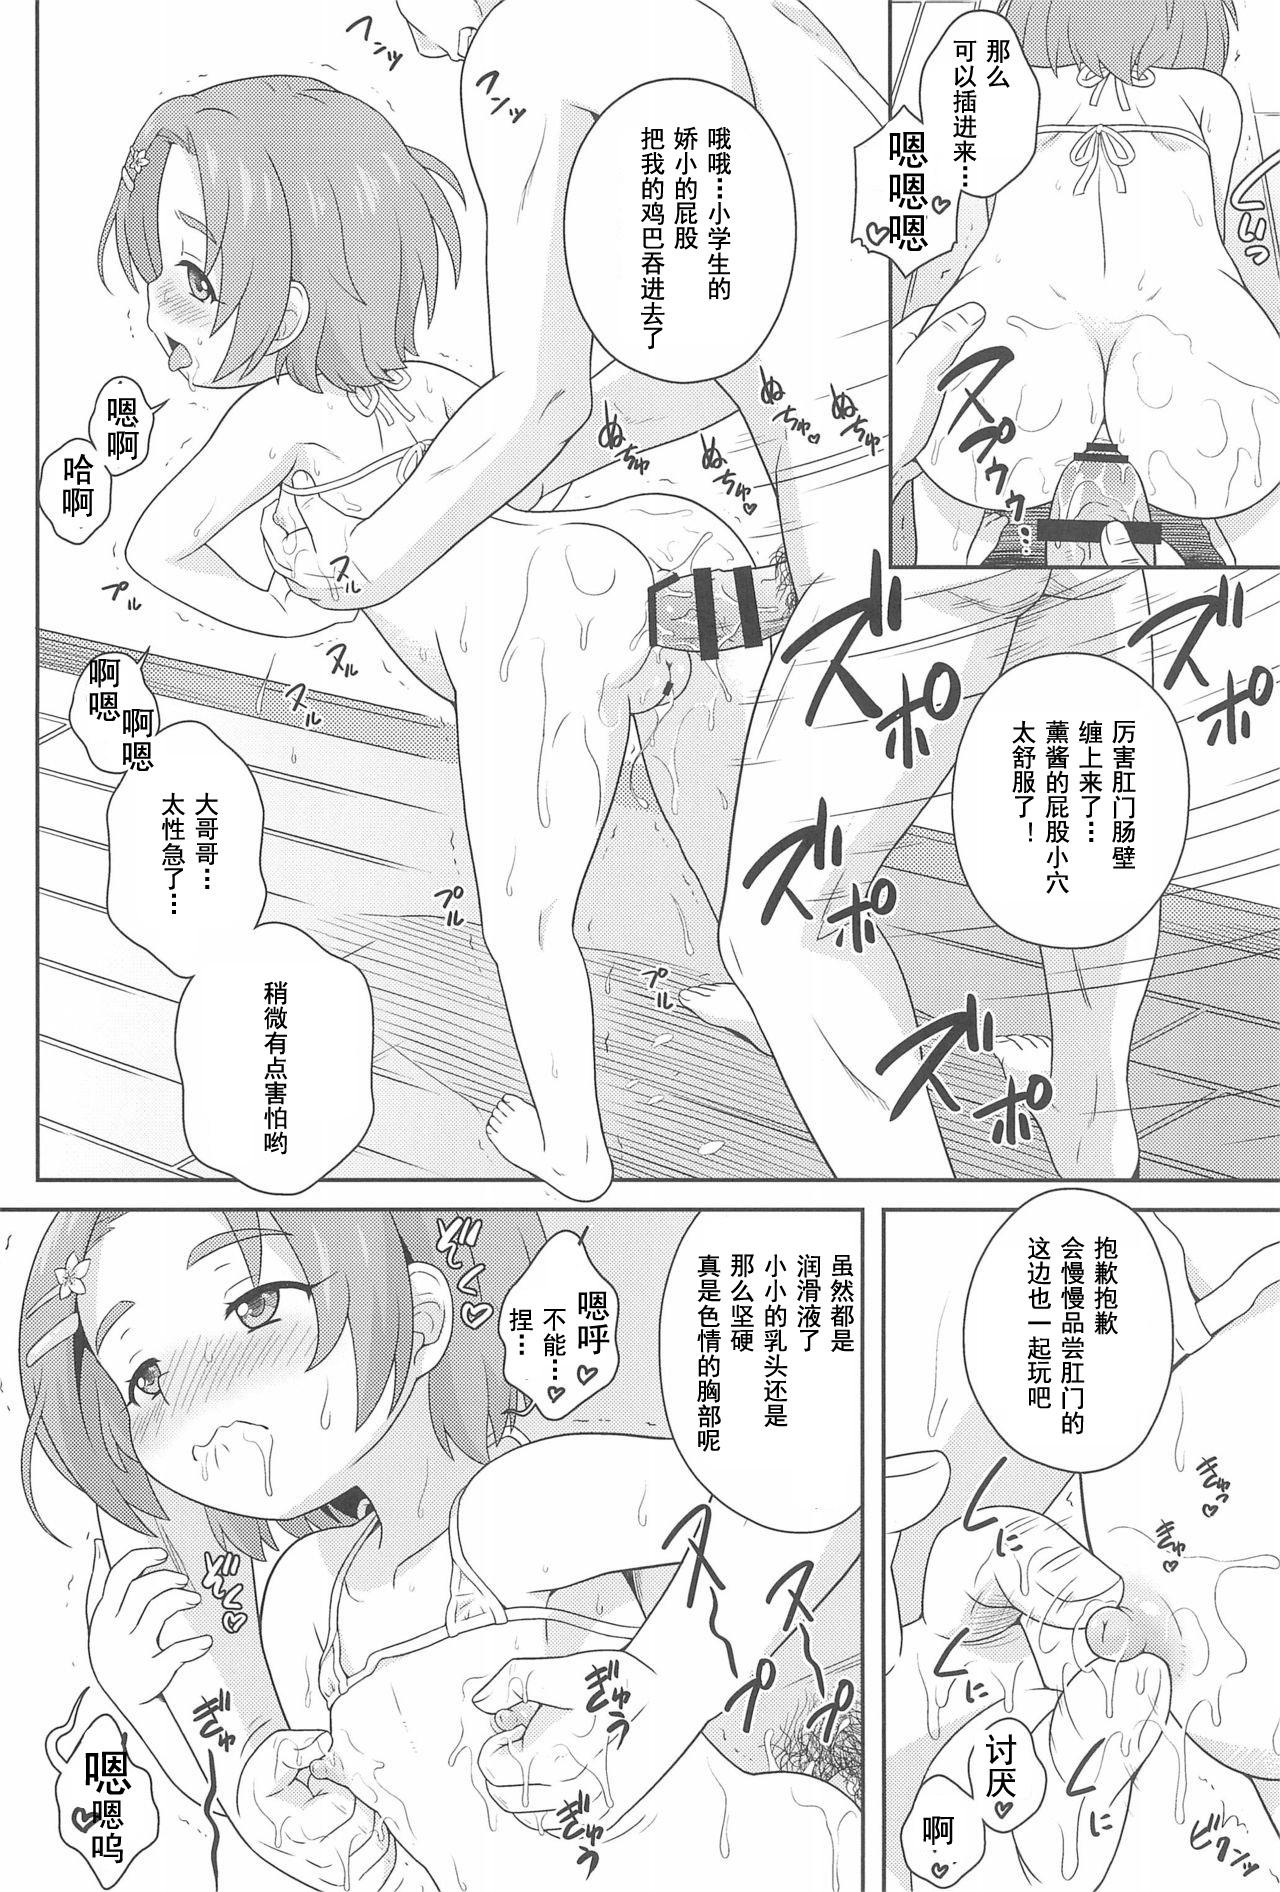 Man Delivery Days Futsukame→ - The idolmaster Africa - Page 8